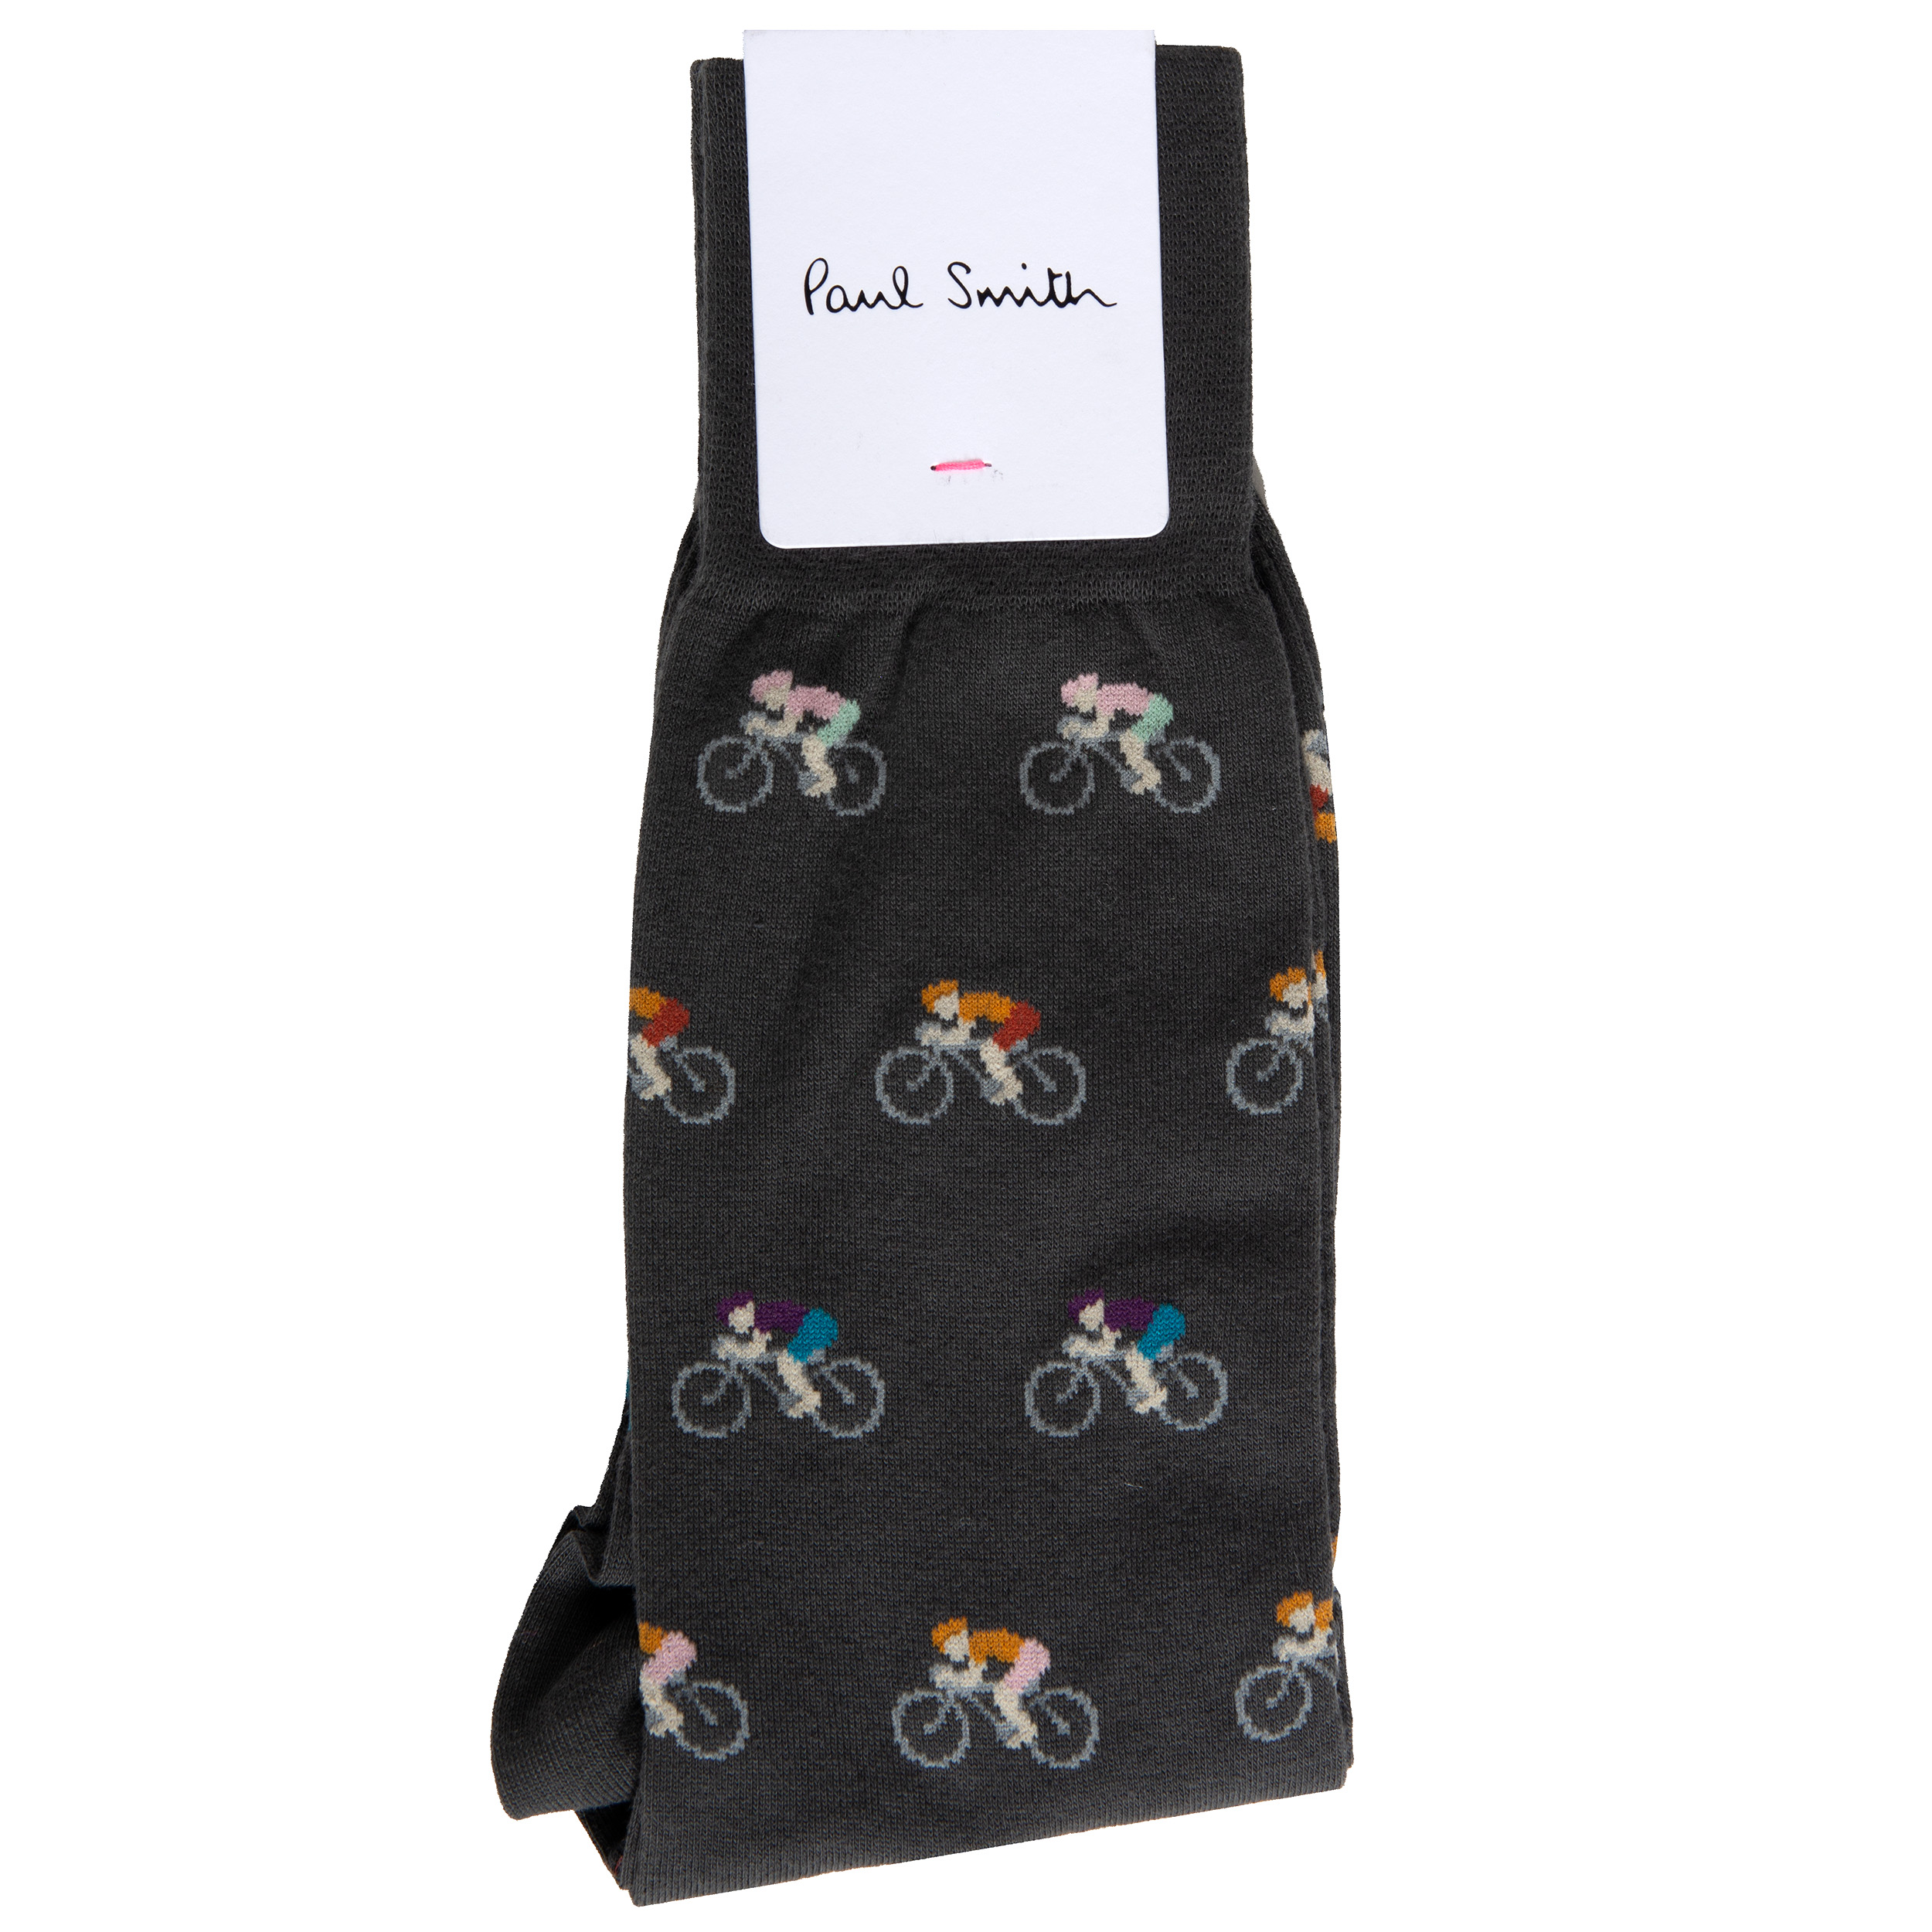 Paul Smith Accessories Bicycle Pattern Socks Grey